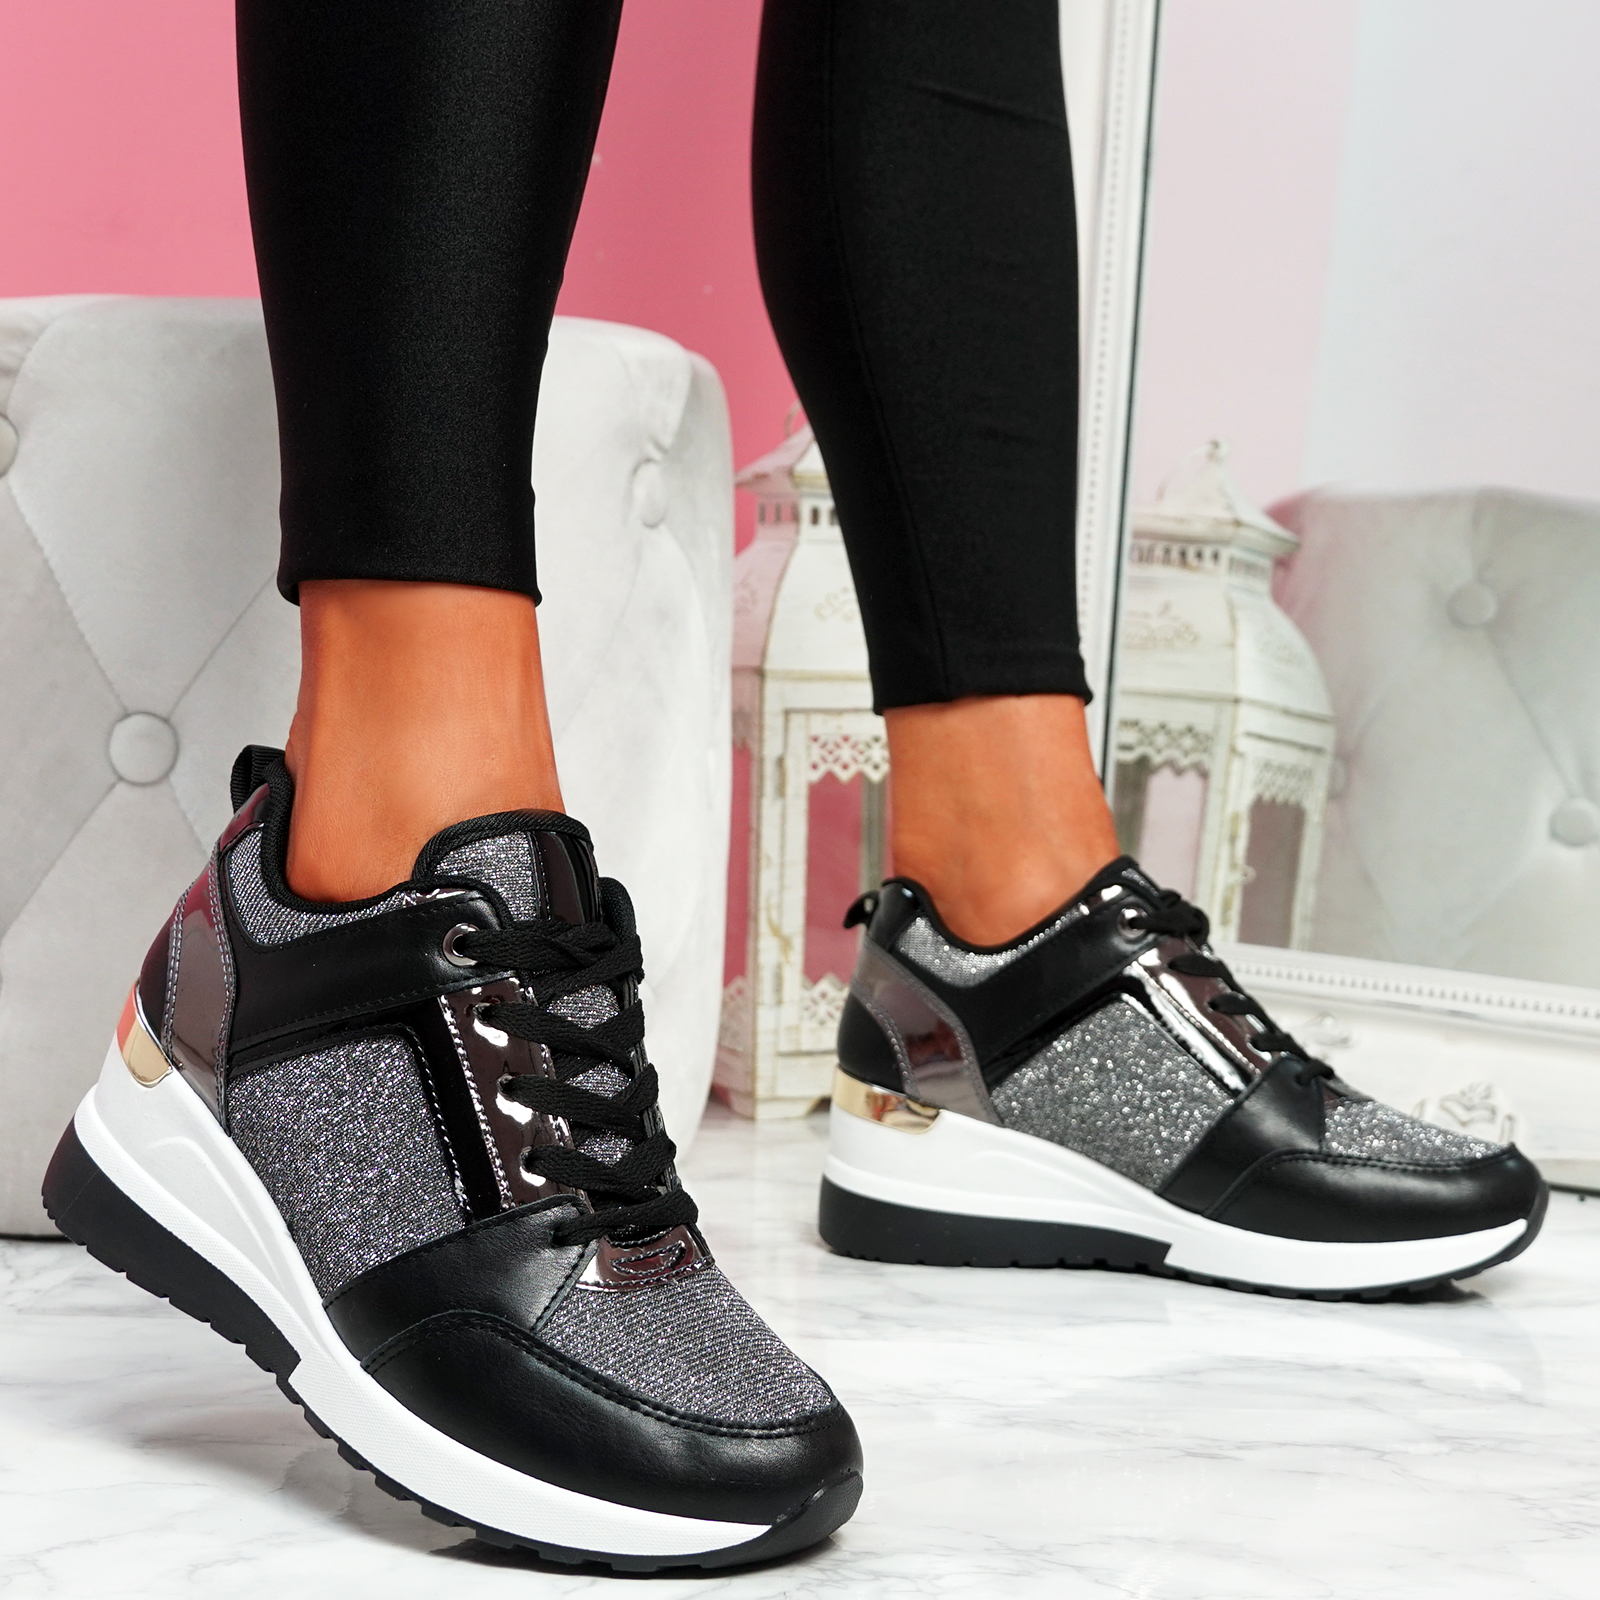 LADIES MULTI COLOUR LACE UP PLATFORM TRAINERS SNAKE PRINT SNEAKERS SHOES SIZES 